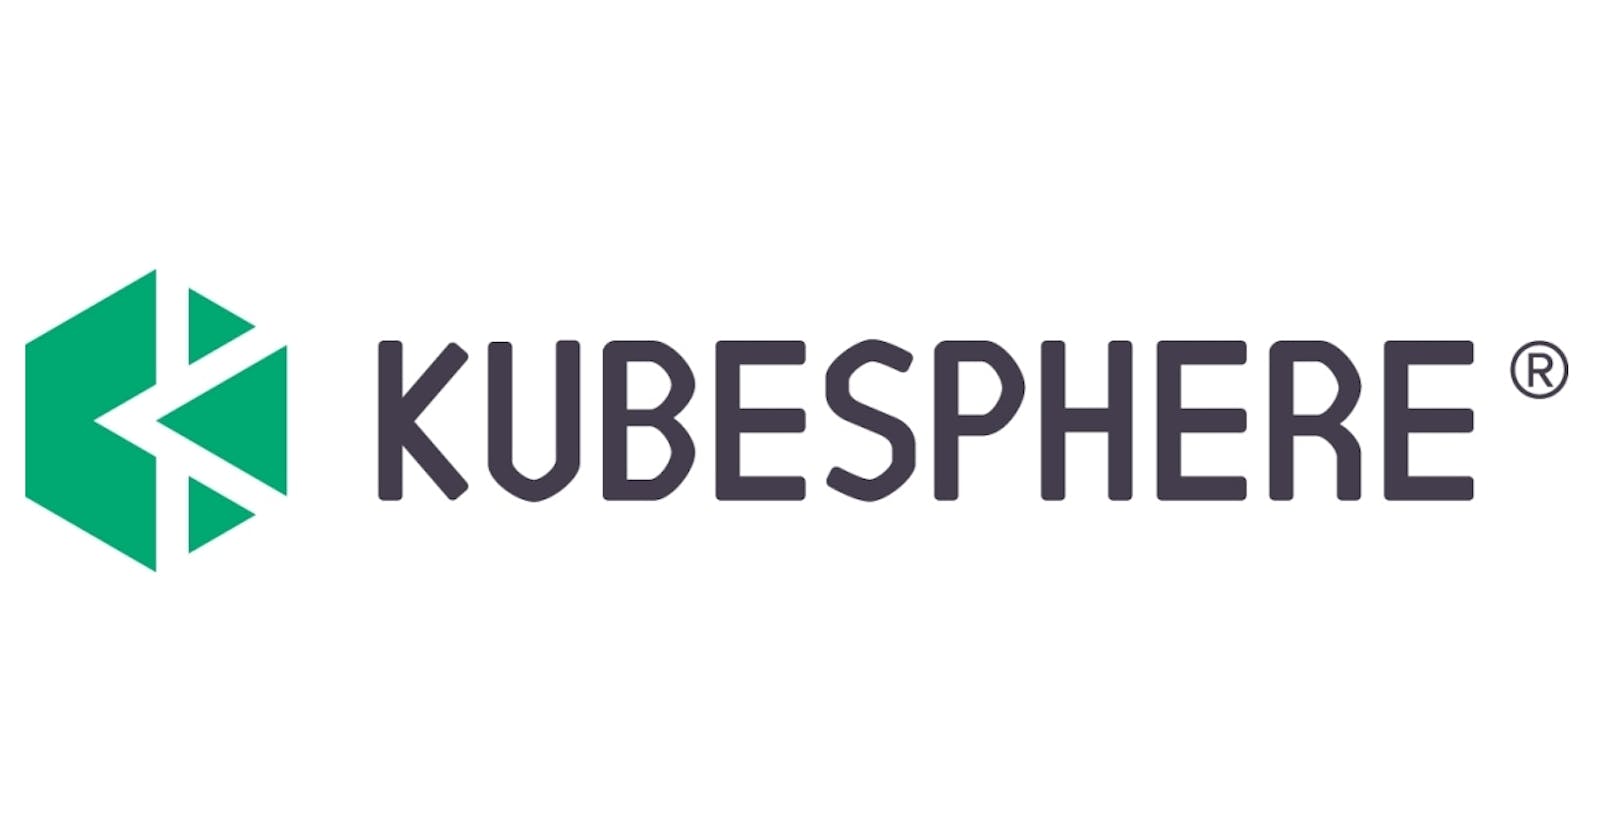 A beginner's Guide to KubeSphere